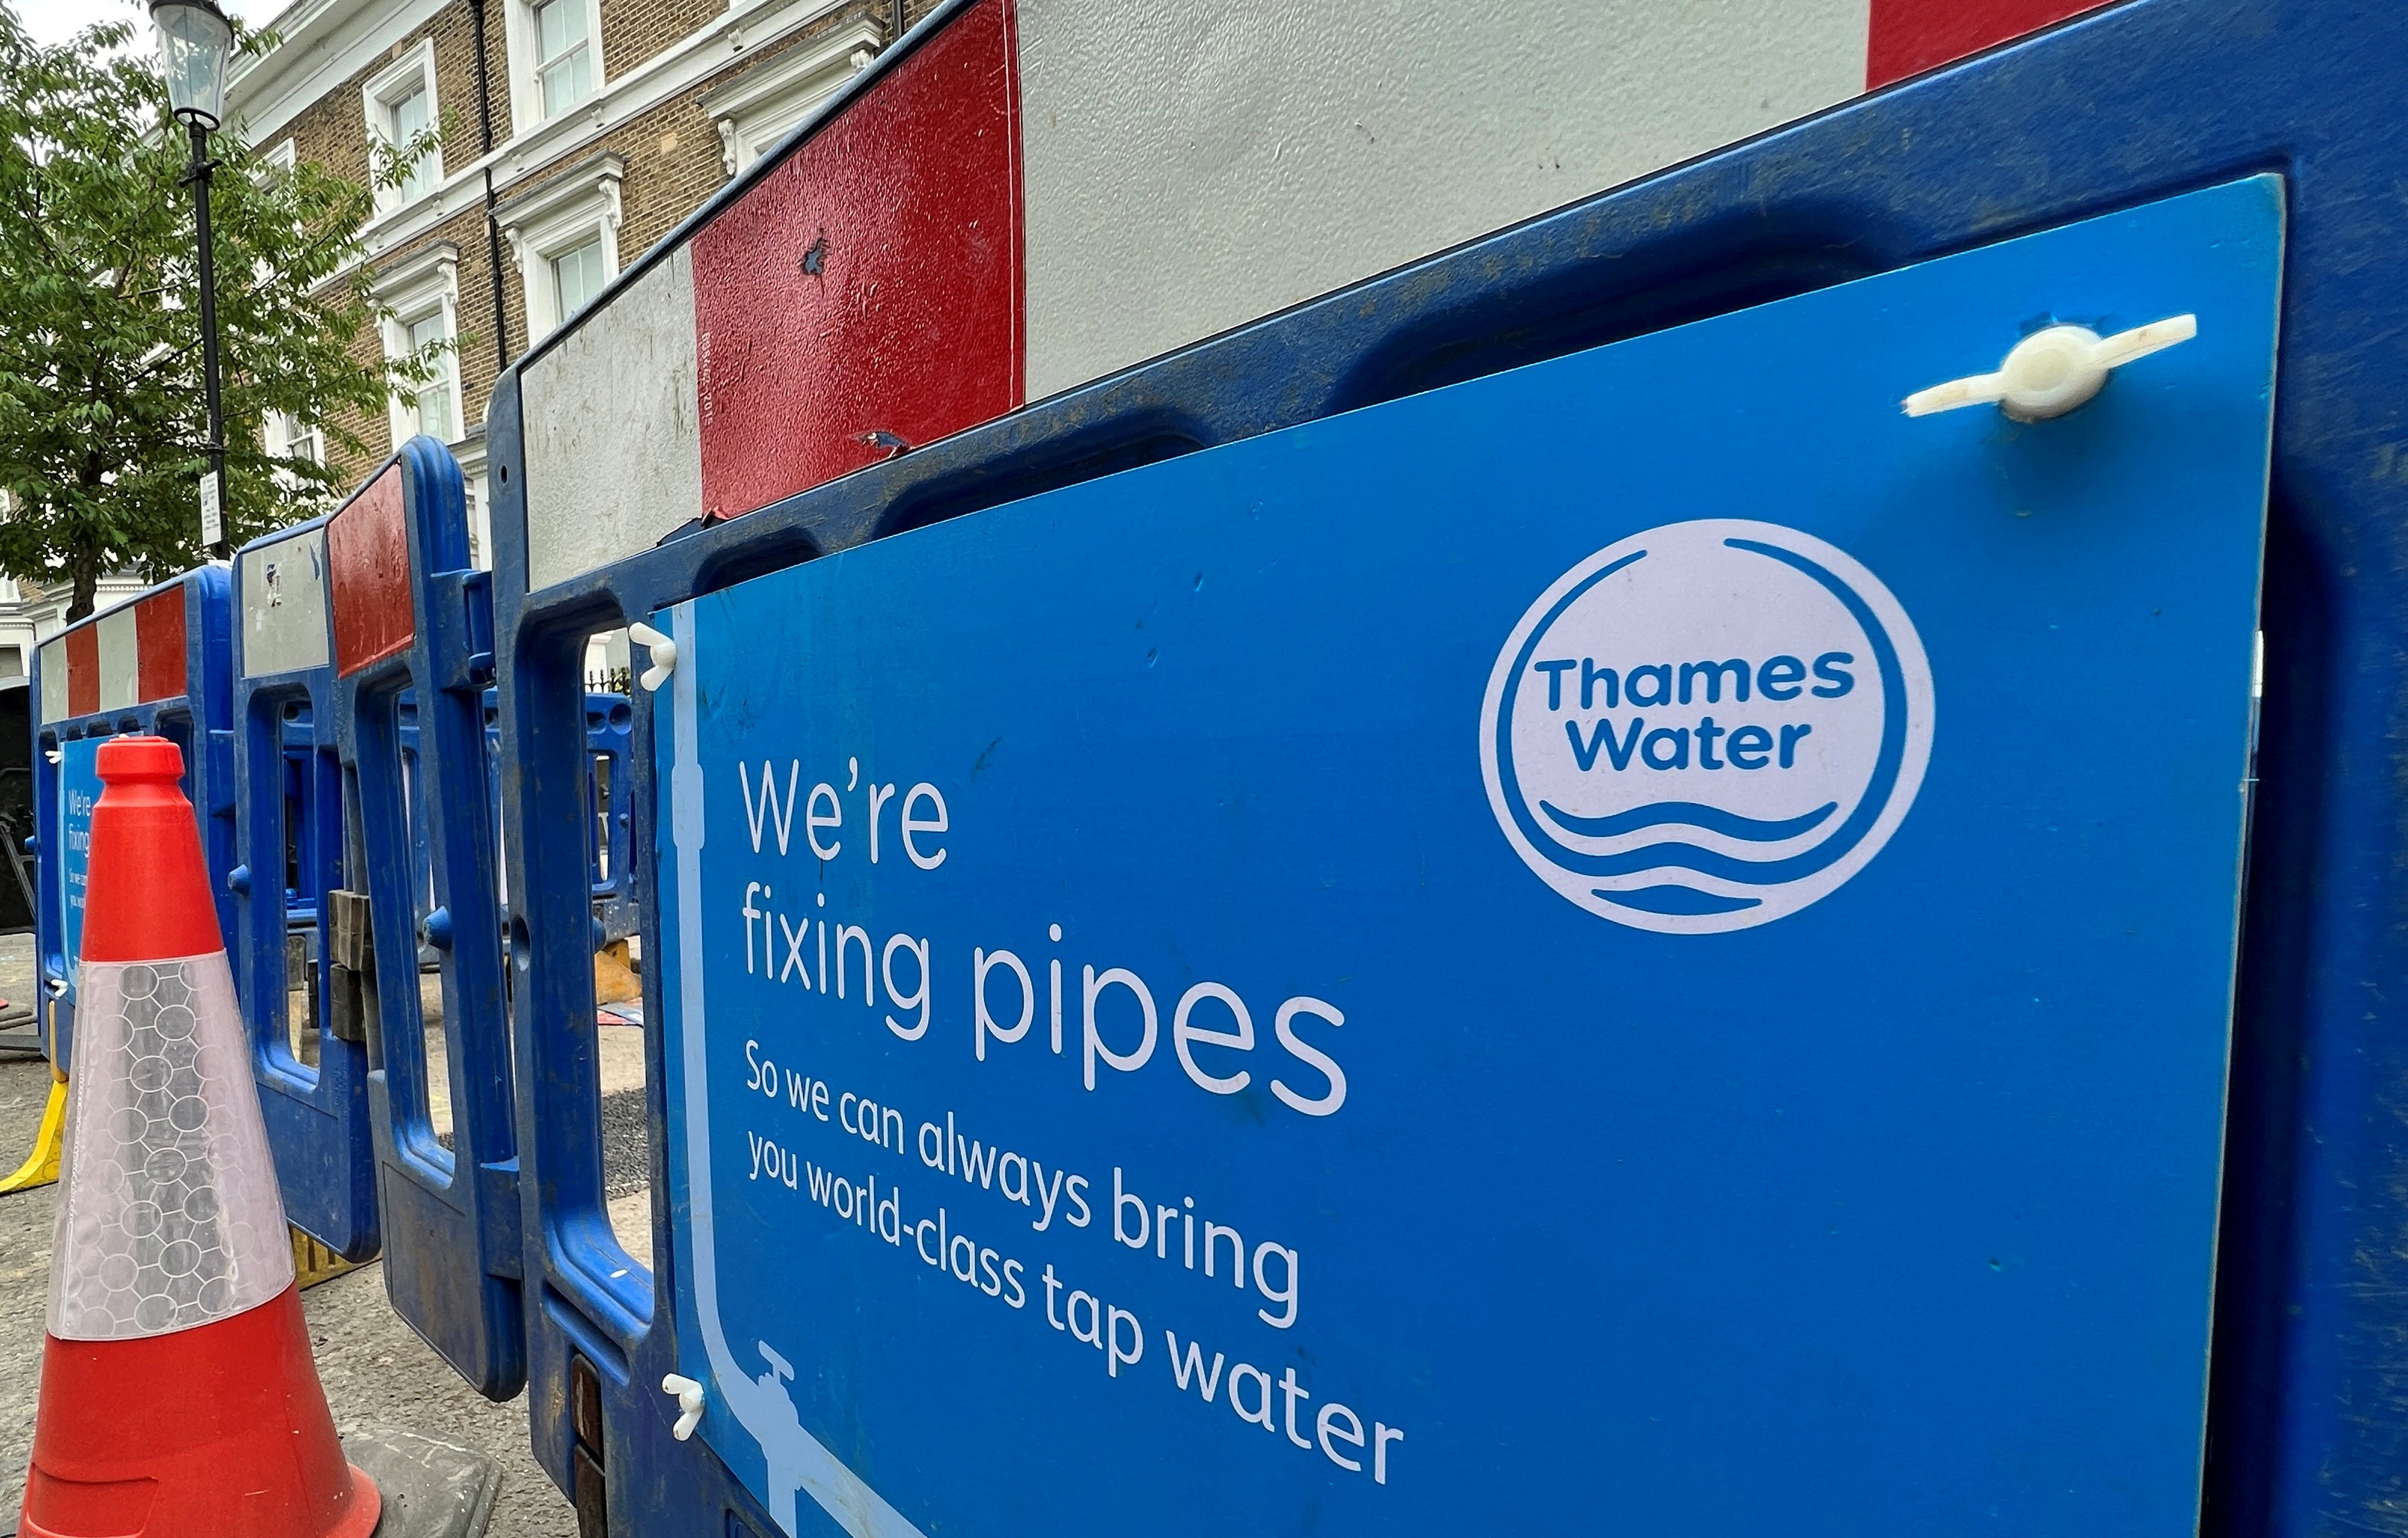 thames water customers face 40 per cent bill hike as investors refuse to inject £500 million lifeline